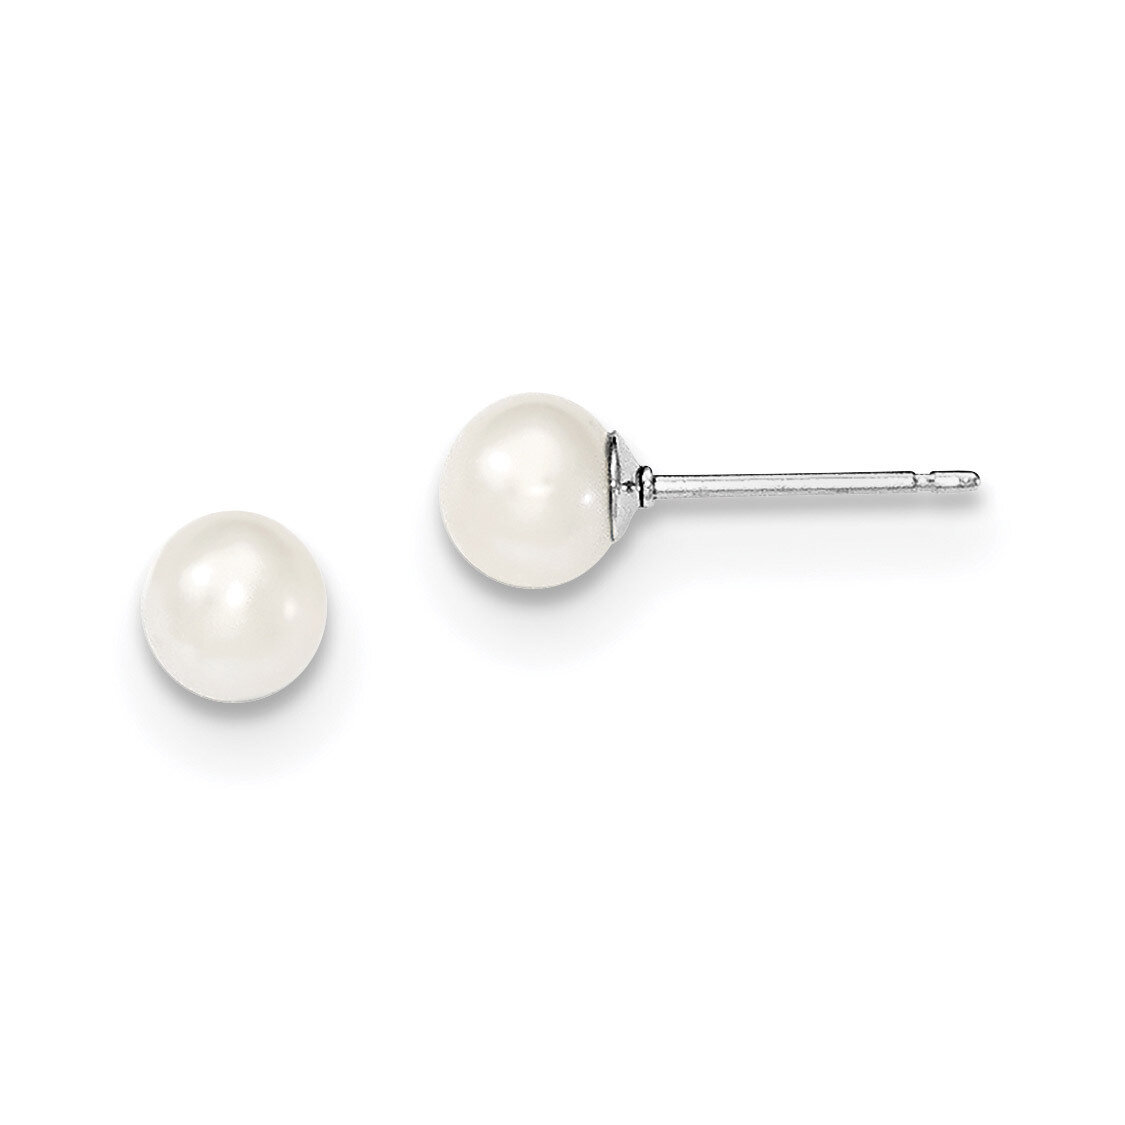 5-6mm White Freshwater Cultured Round Pearl Stud Earrings Sterling Silver QE12732